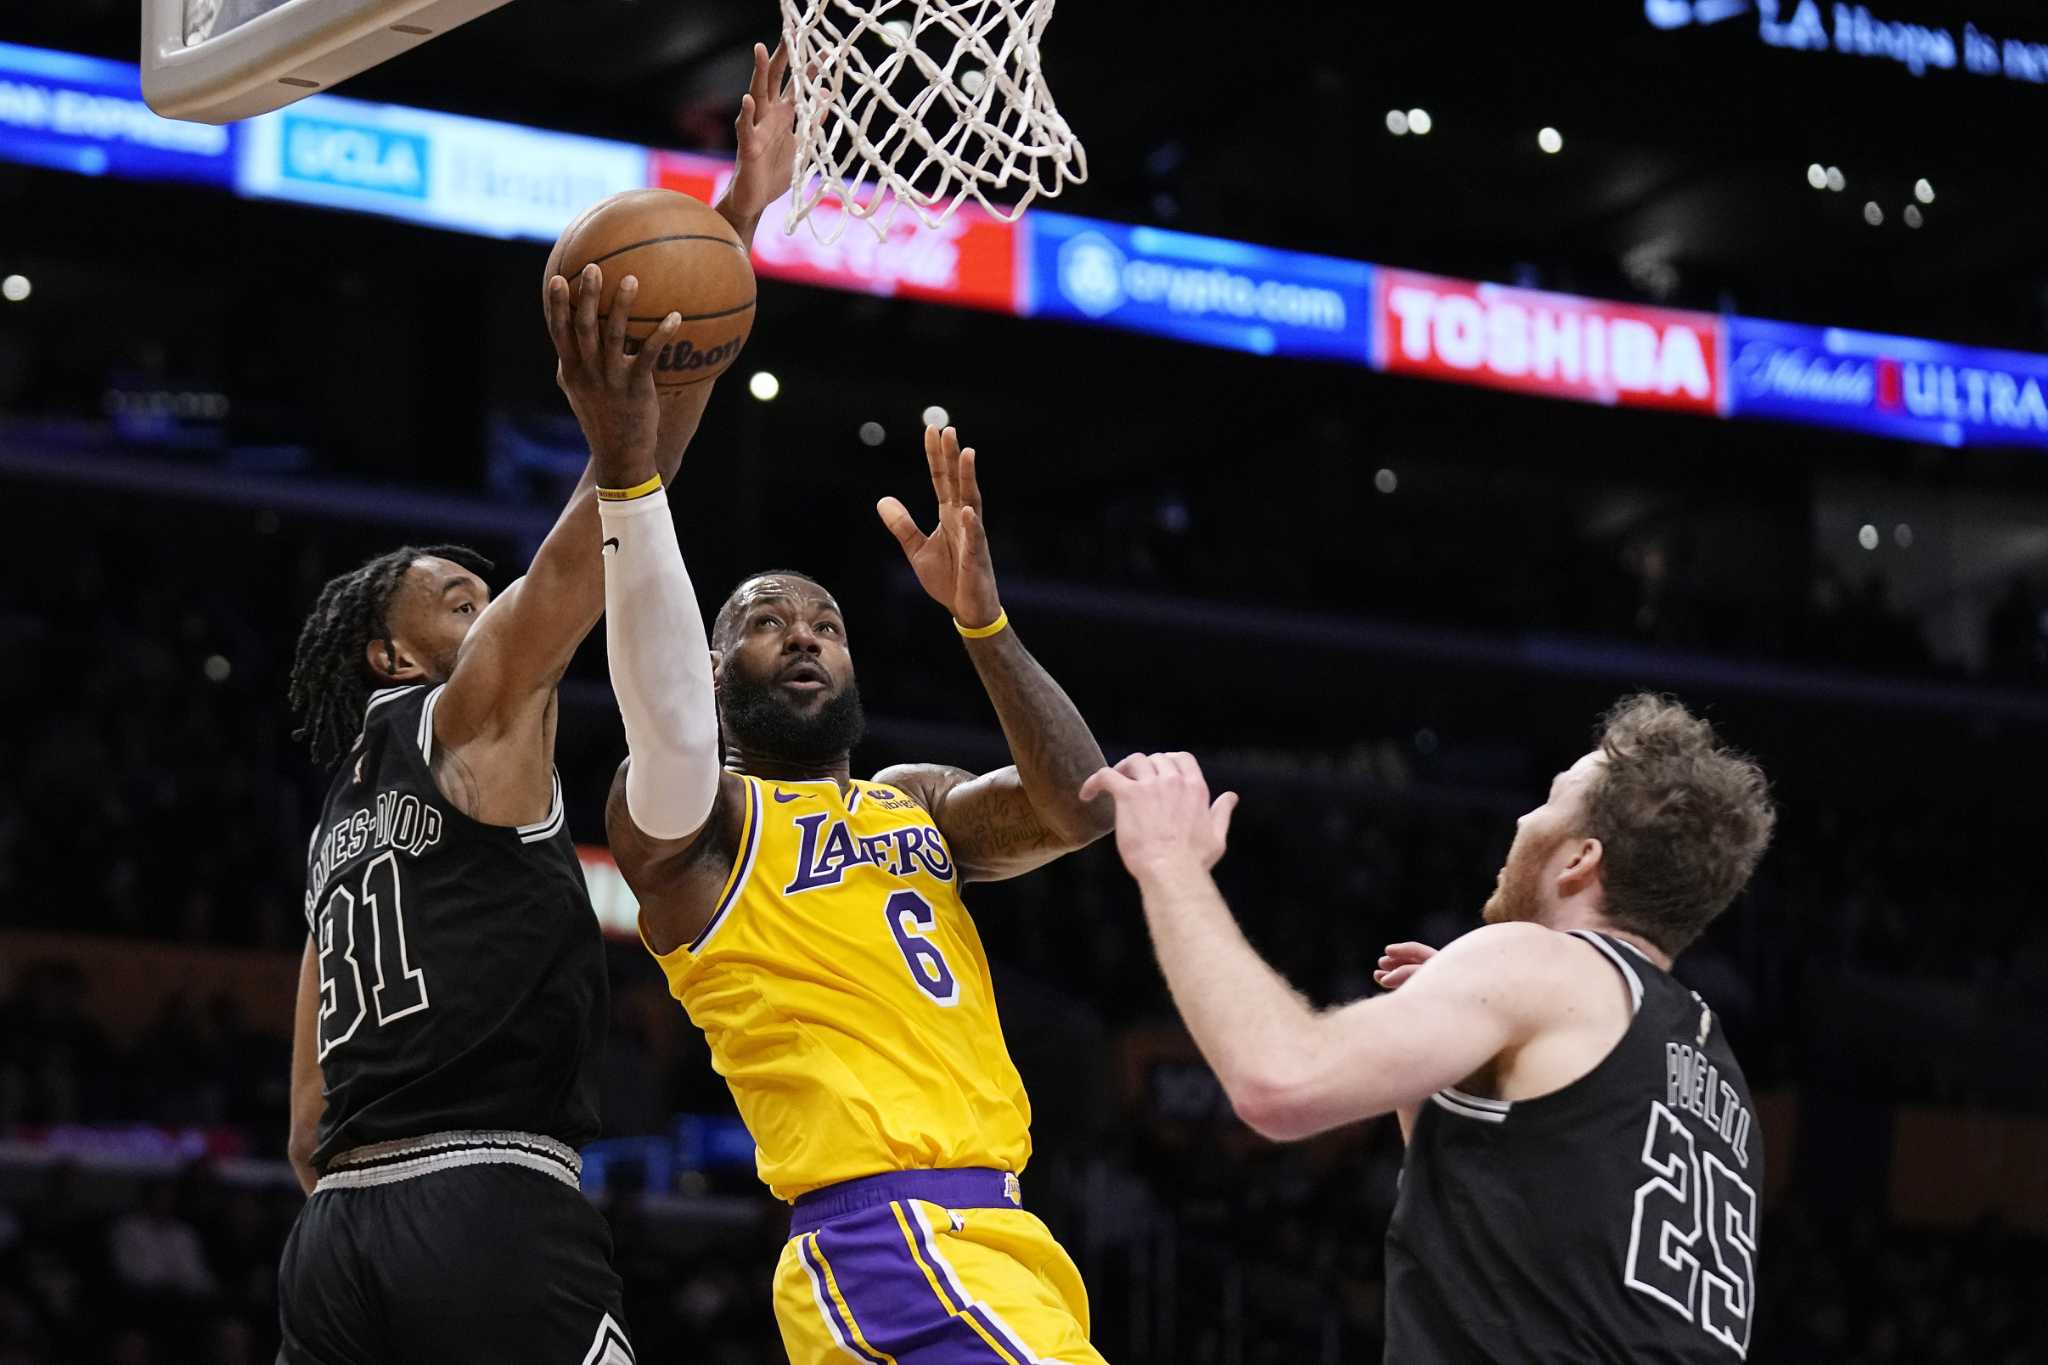 LeBron James’ playmaking helps Lakers sweep season series with Spurs